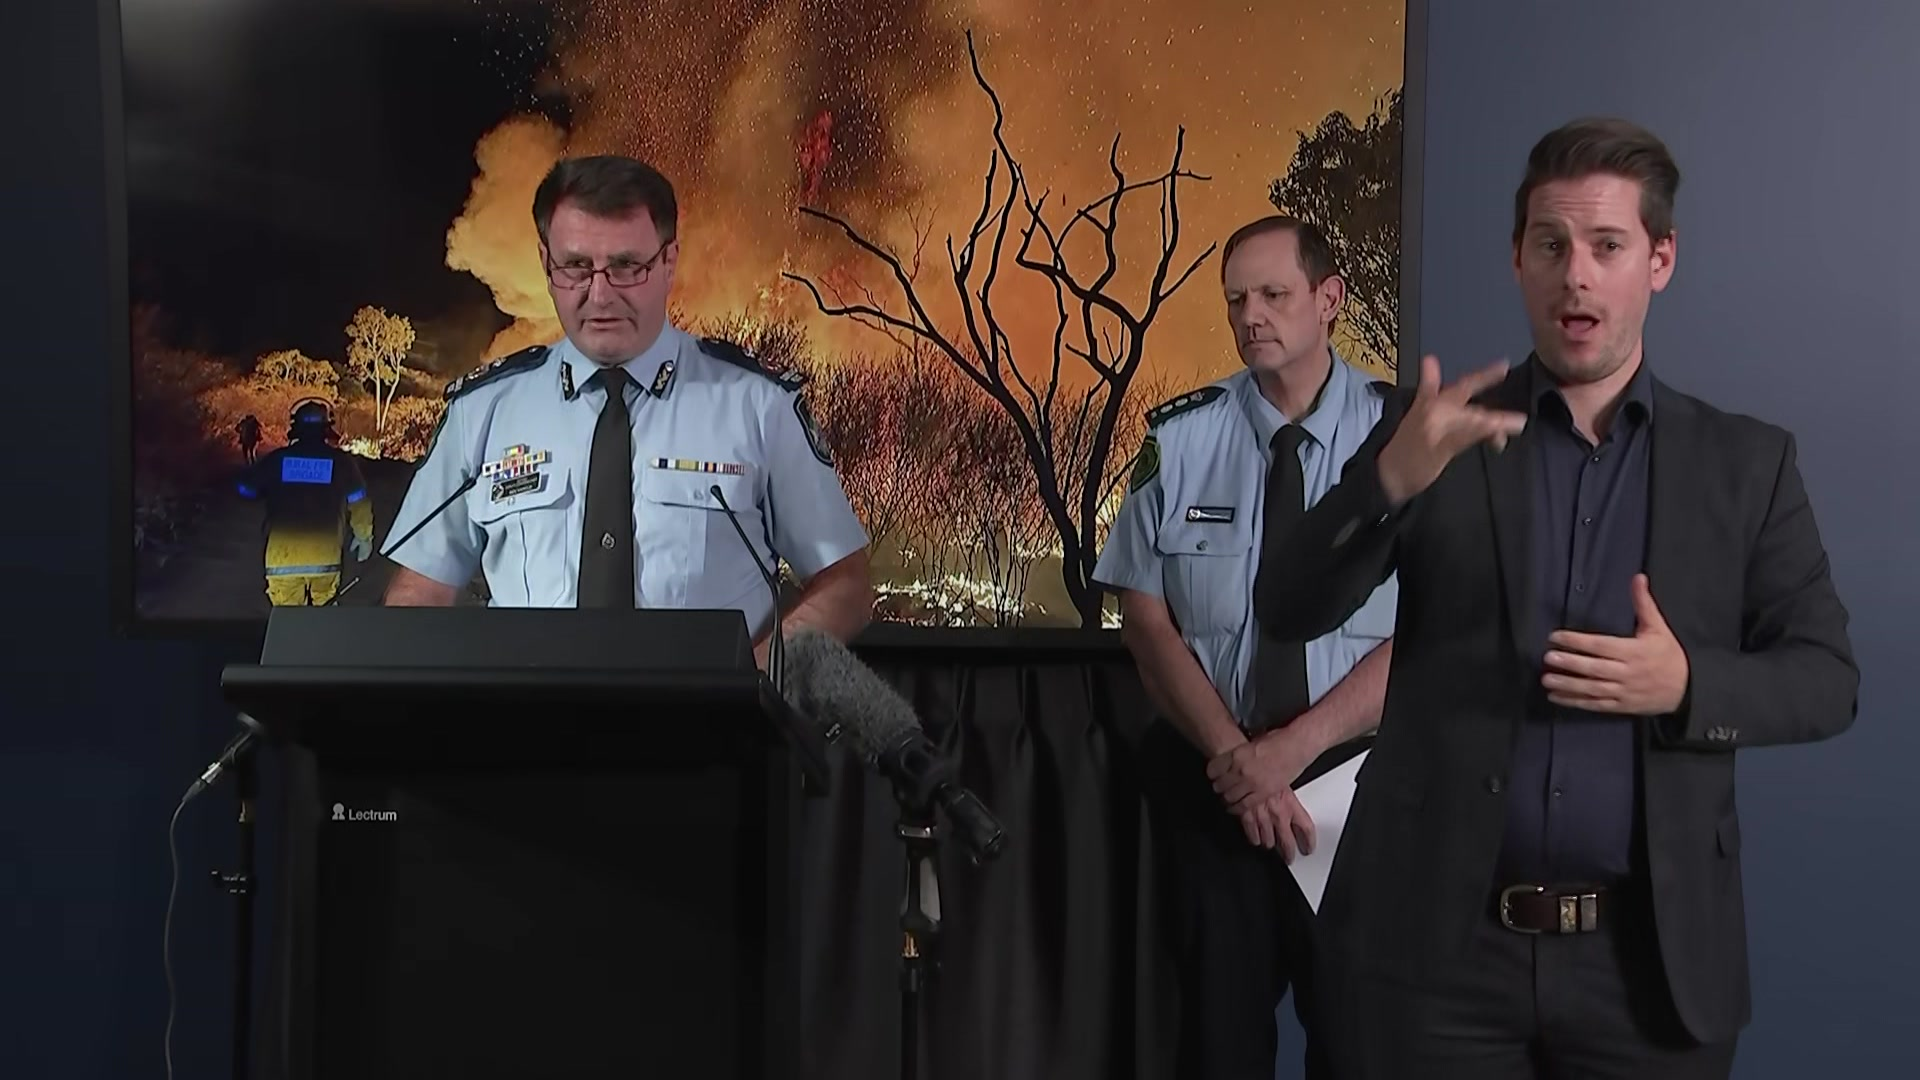 A man in a police uniform speaks at a lectern.